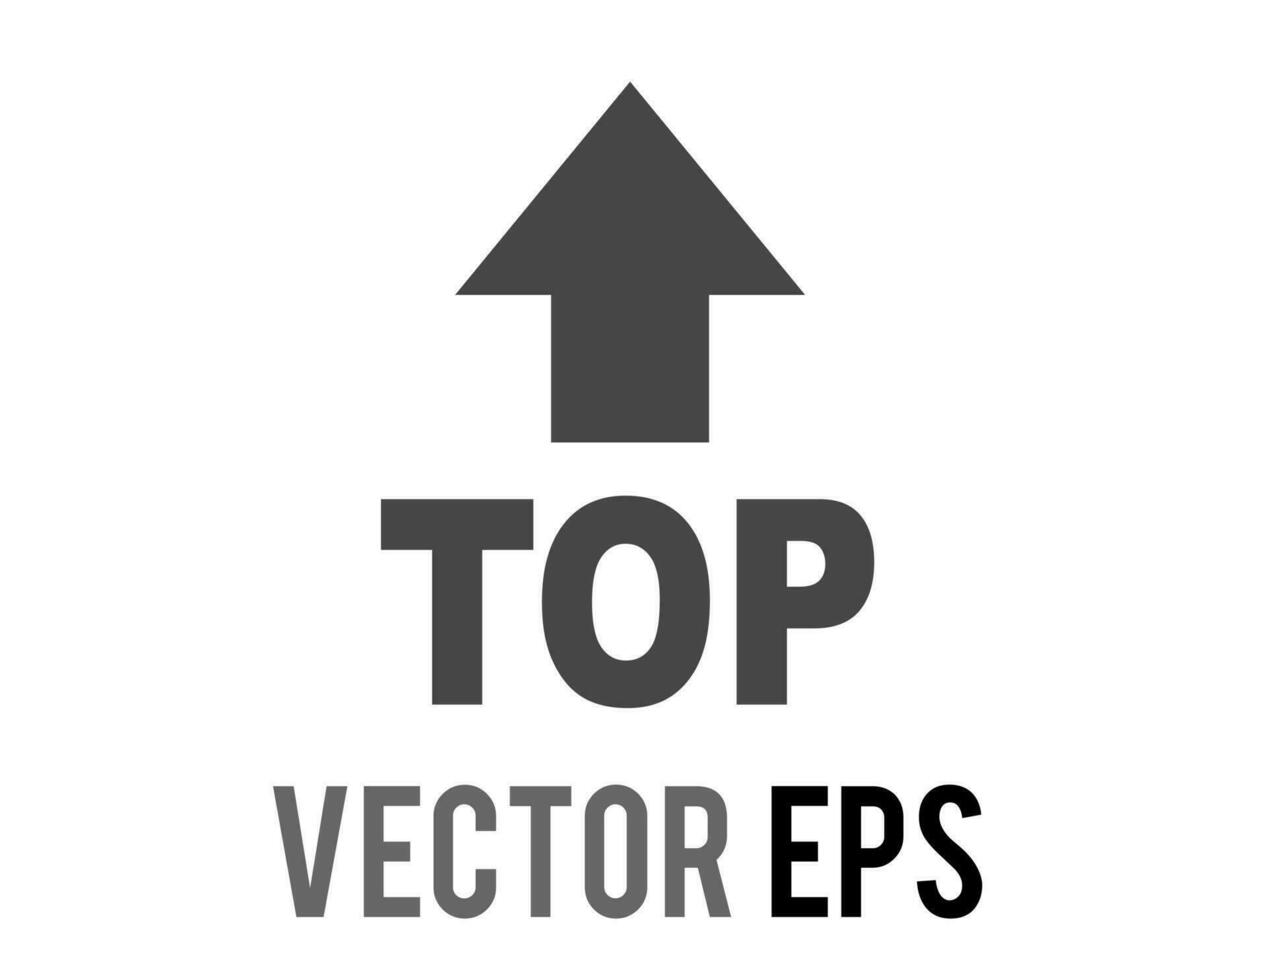 Vector word top with an arrow icon pointing up above it